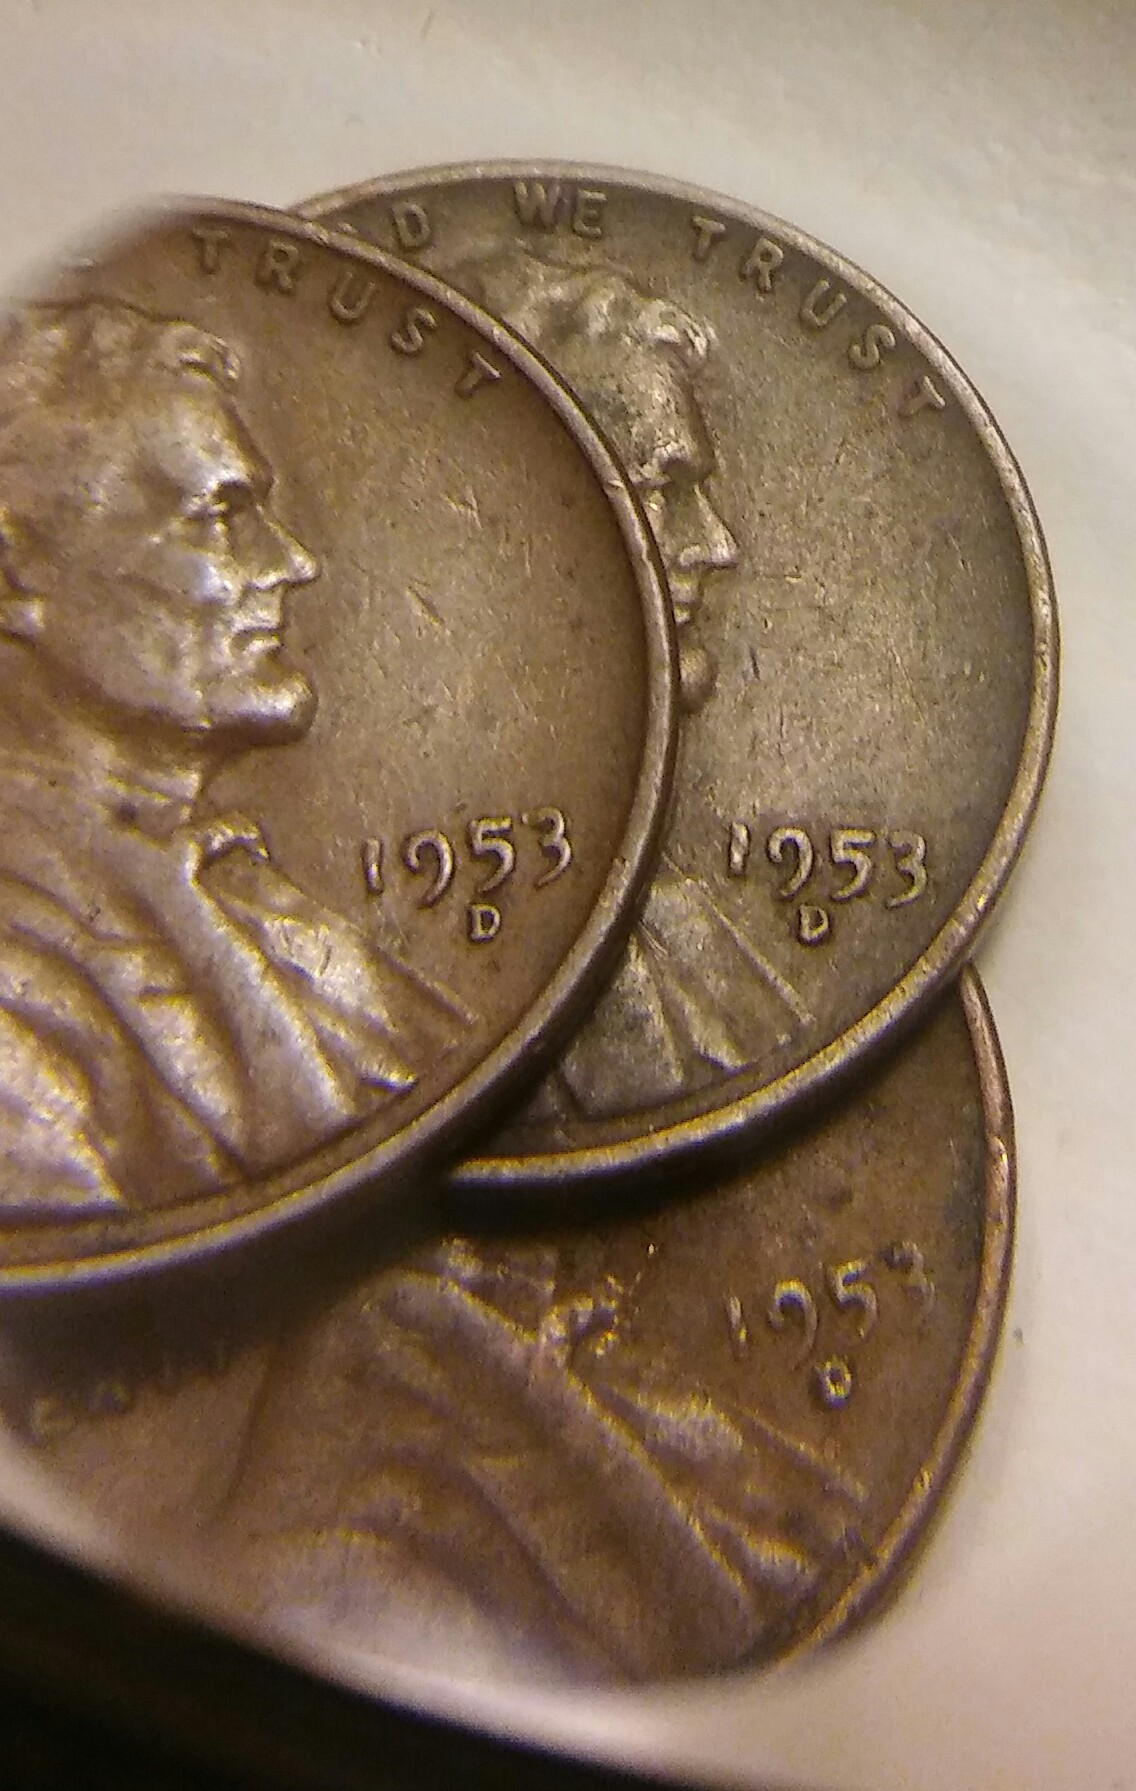 What is the value of a 1967 quarter?